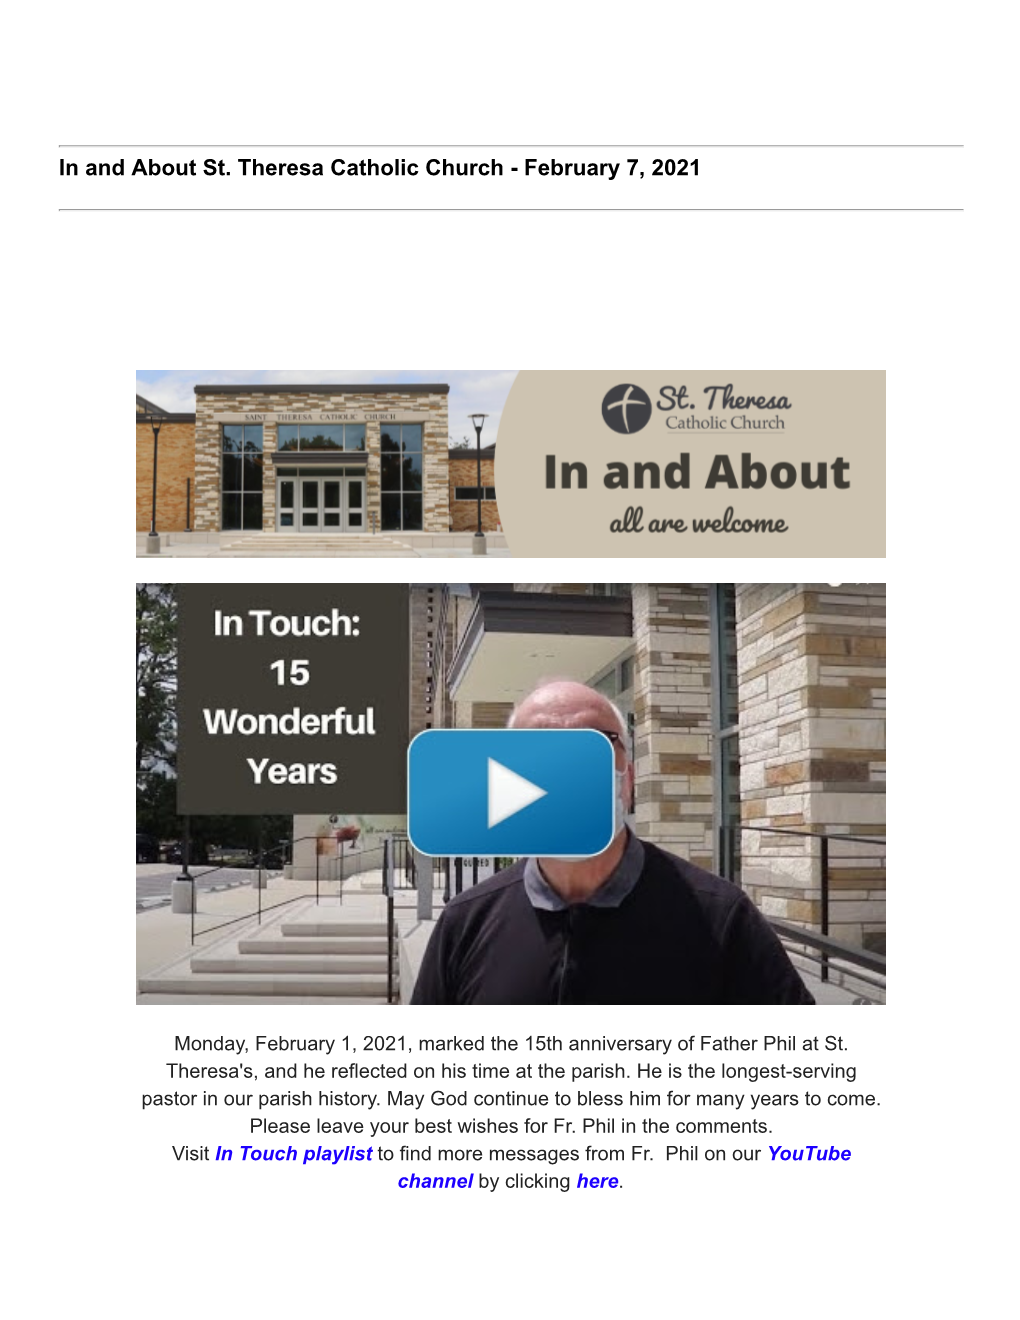 In and About St. Theresa Catholic Church - February 7, 2021